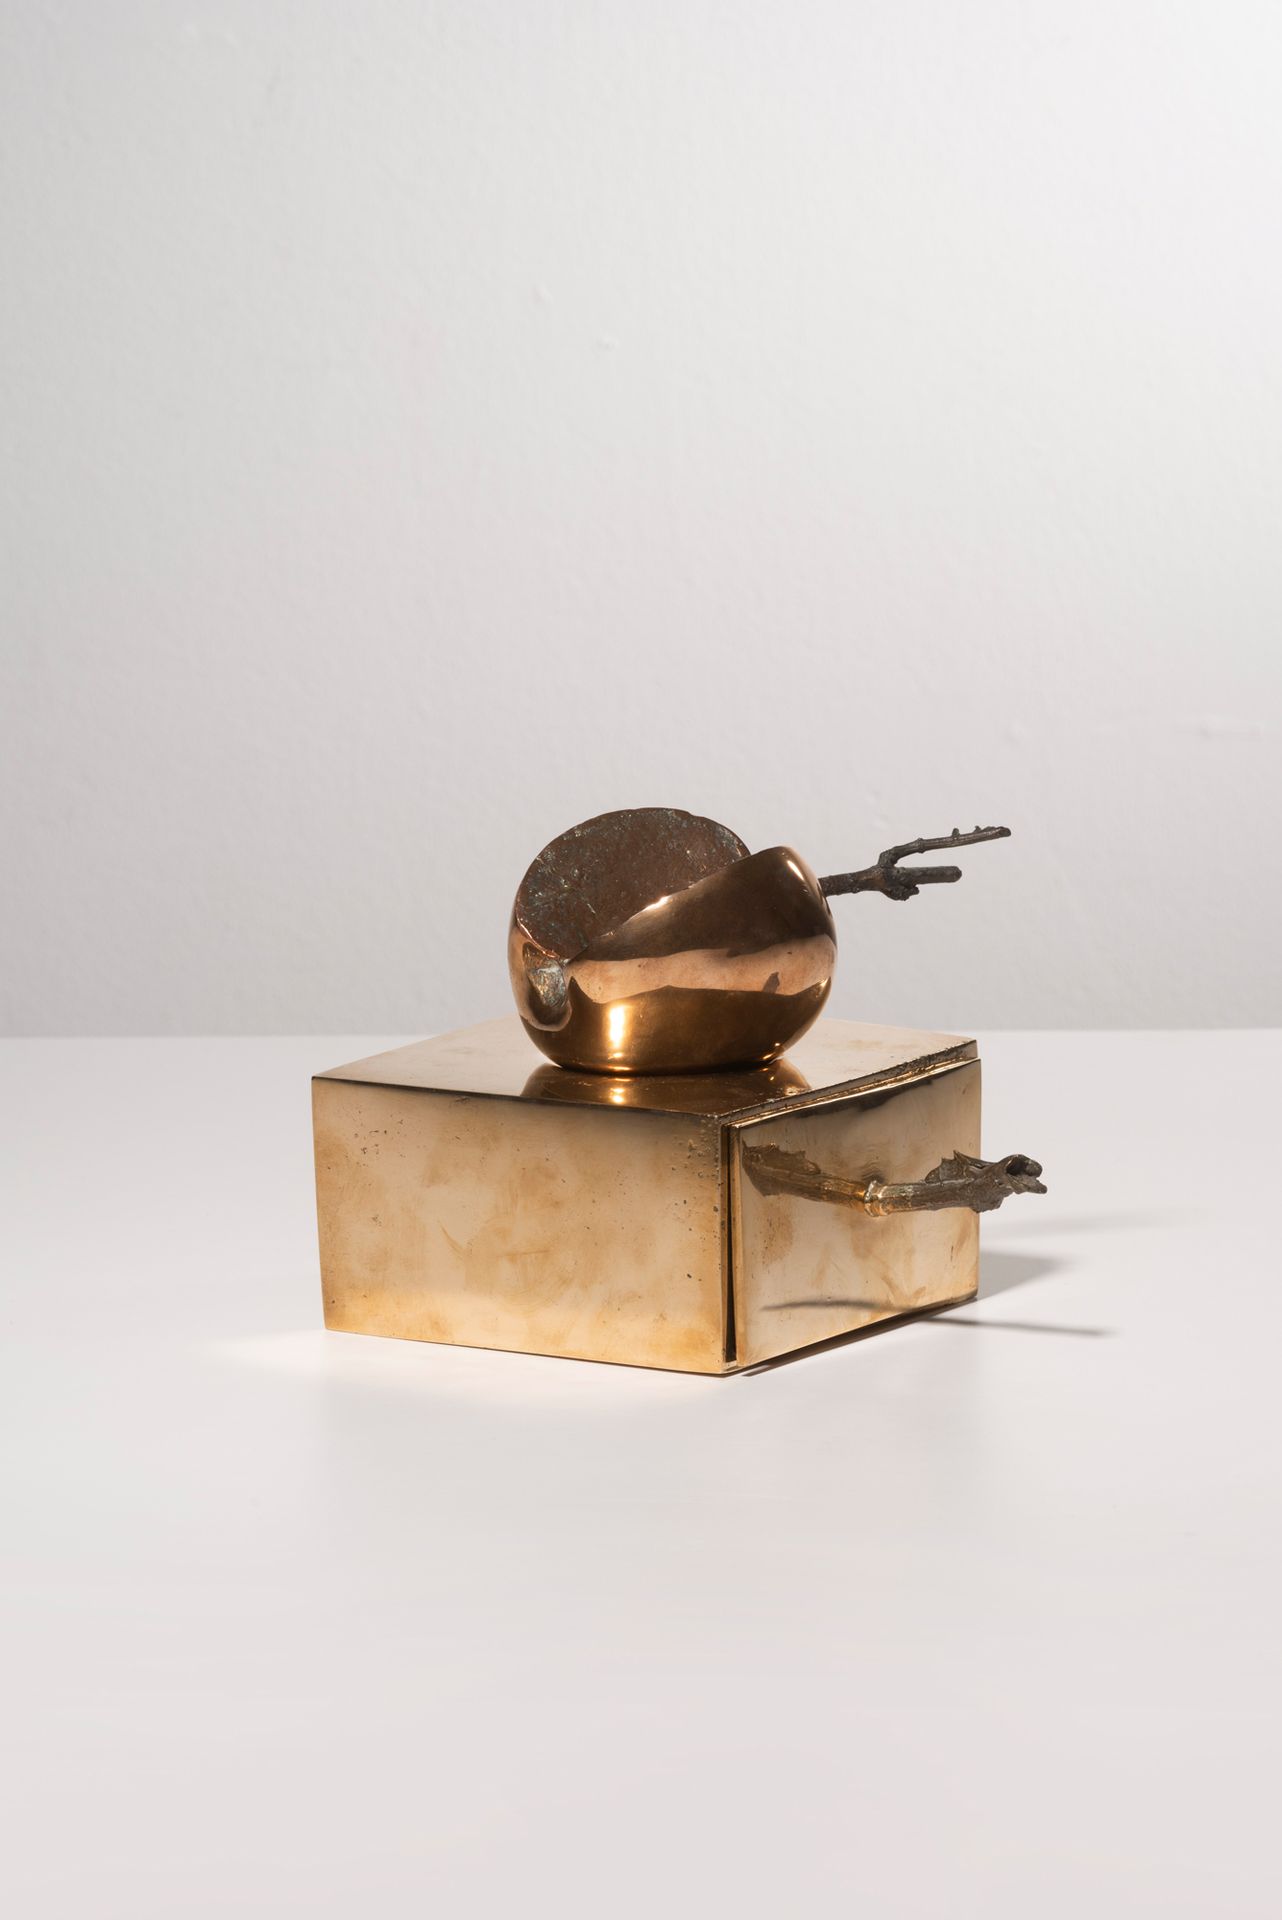 ALIK CAVALIERE (1926-1998) Apple and drawer, circa 1968
Bronze with golden and b&hellip;